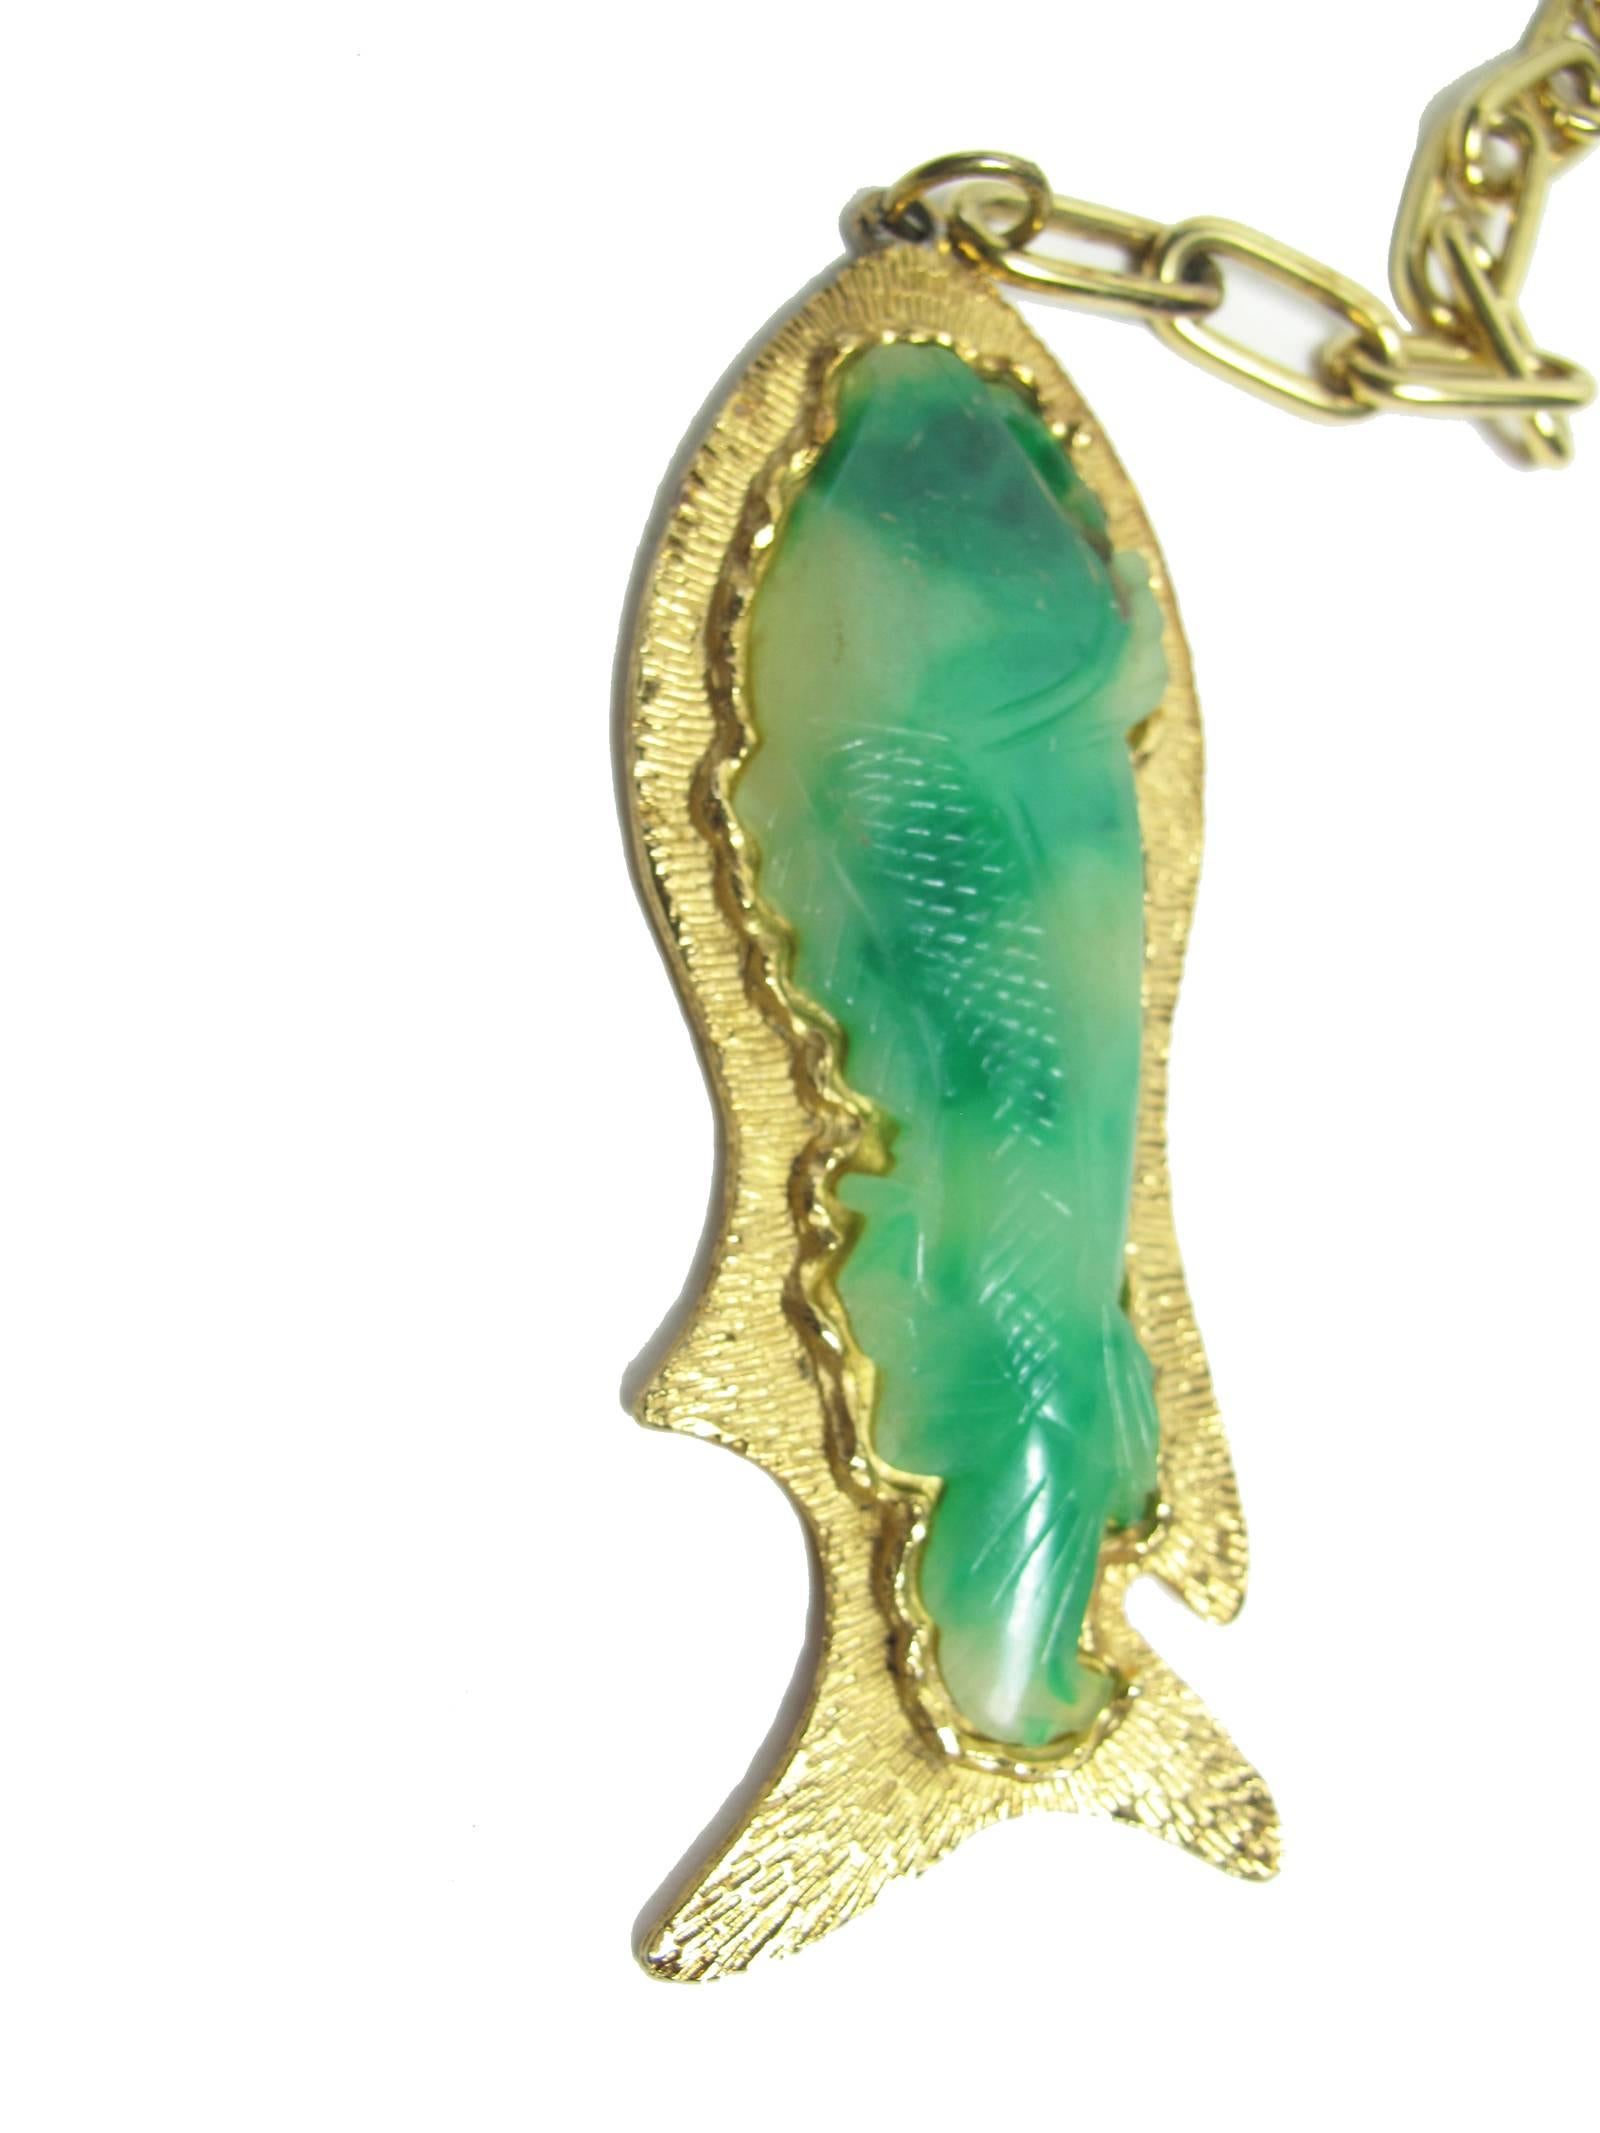 Vendome large faux jade fish gold tone necklace.  Condition: Very good. 

Pendant : 4 1/2